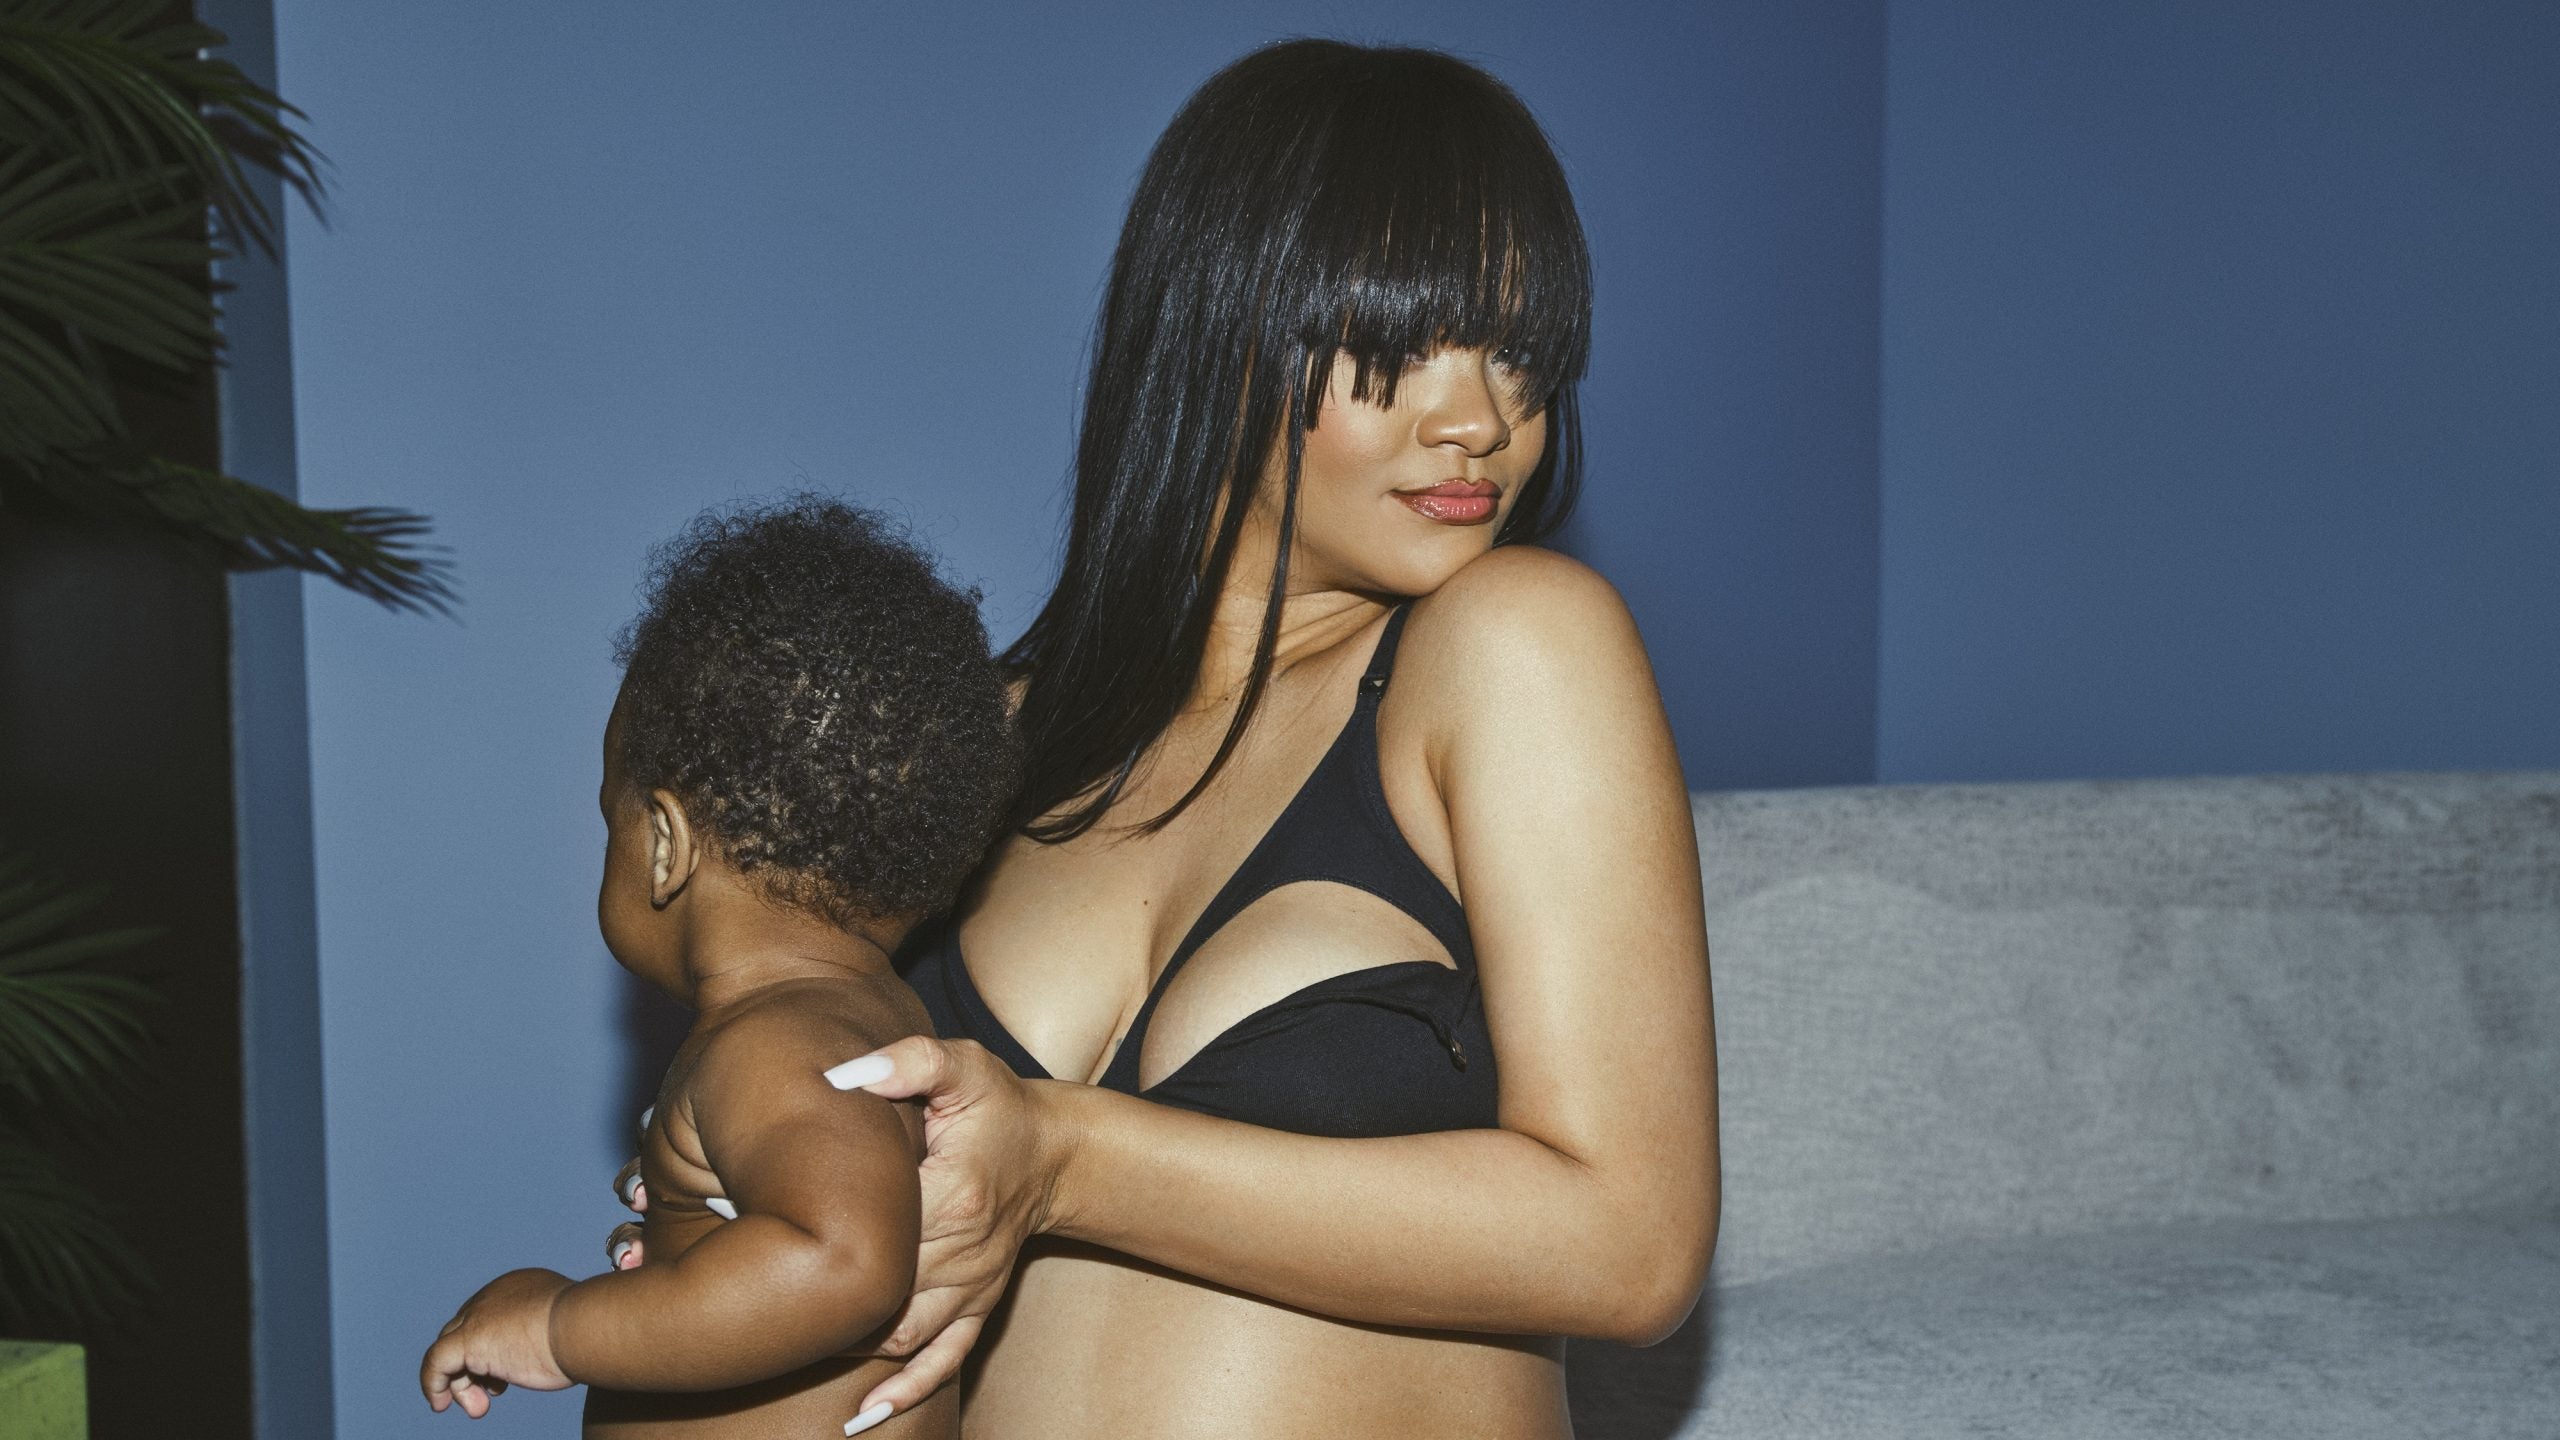 Rihanna & Savage X Fenty Launch Maternity Collection: Where to Buy